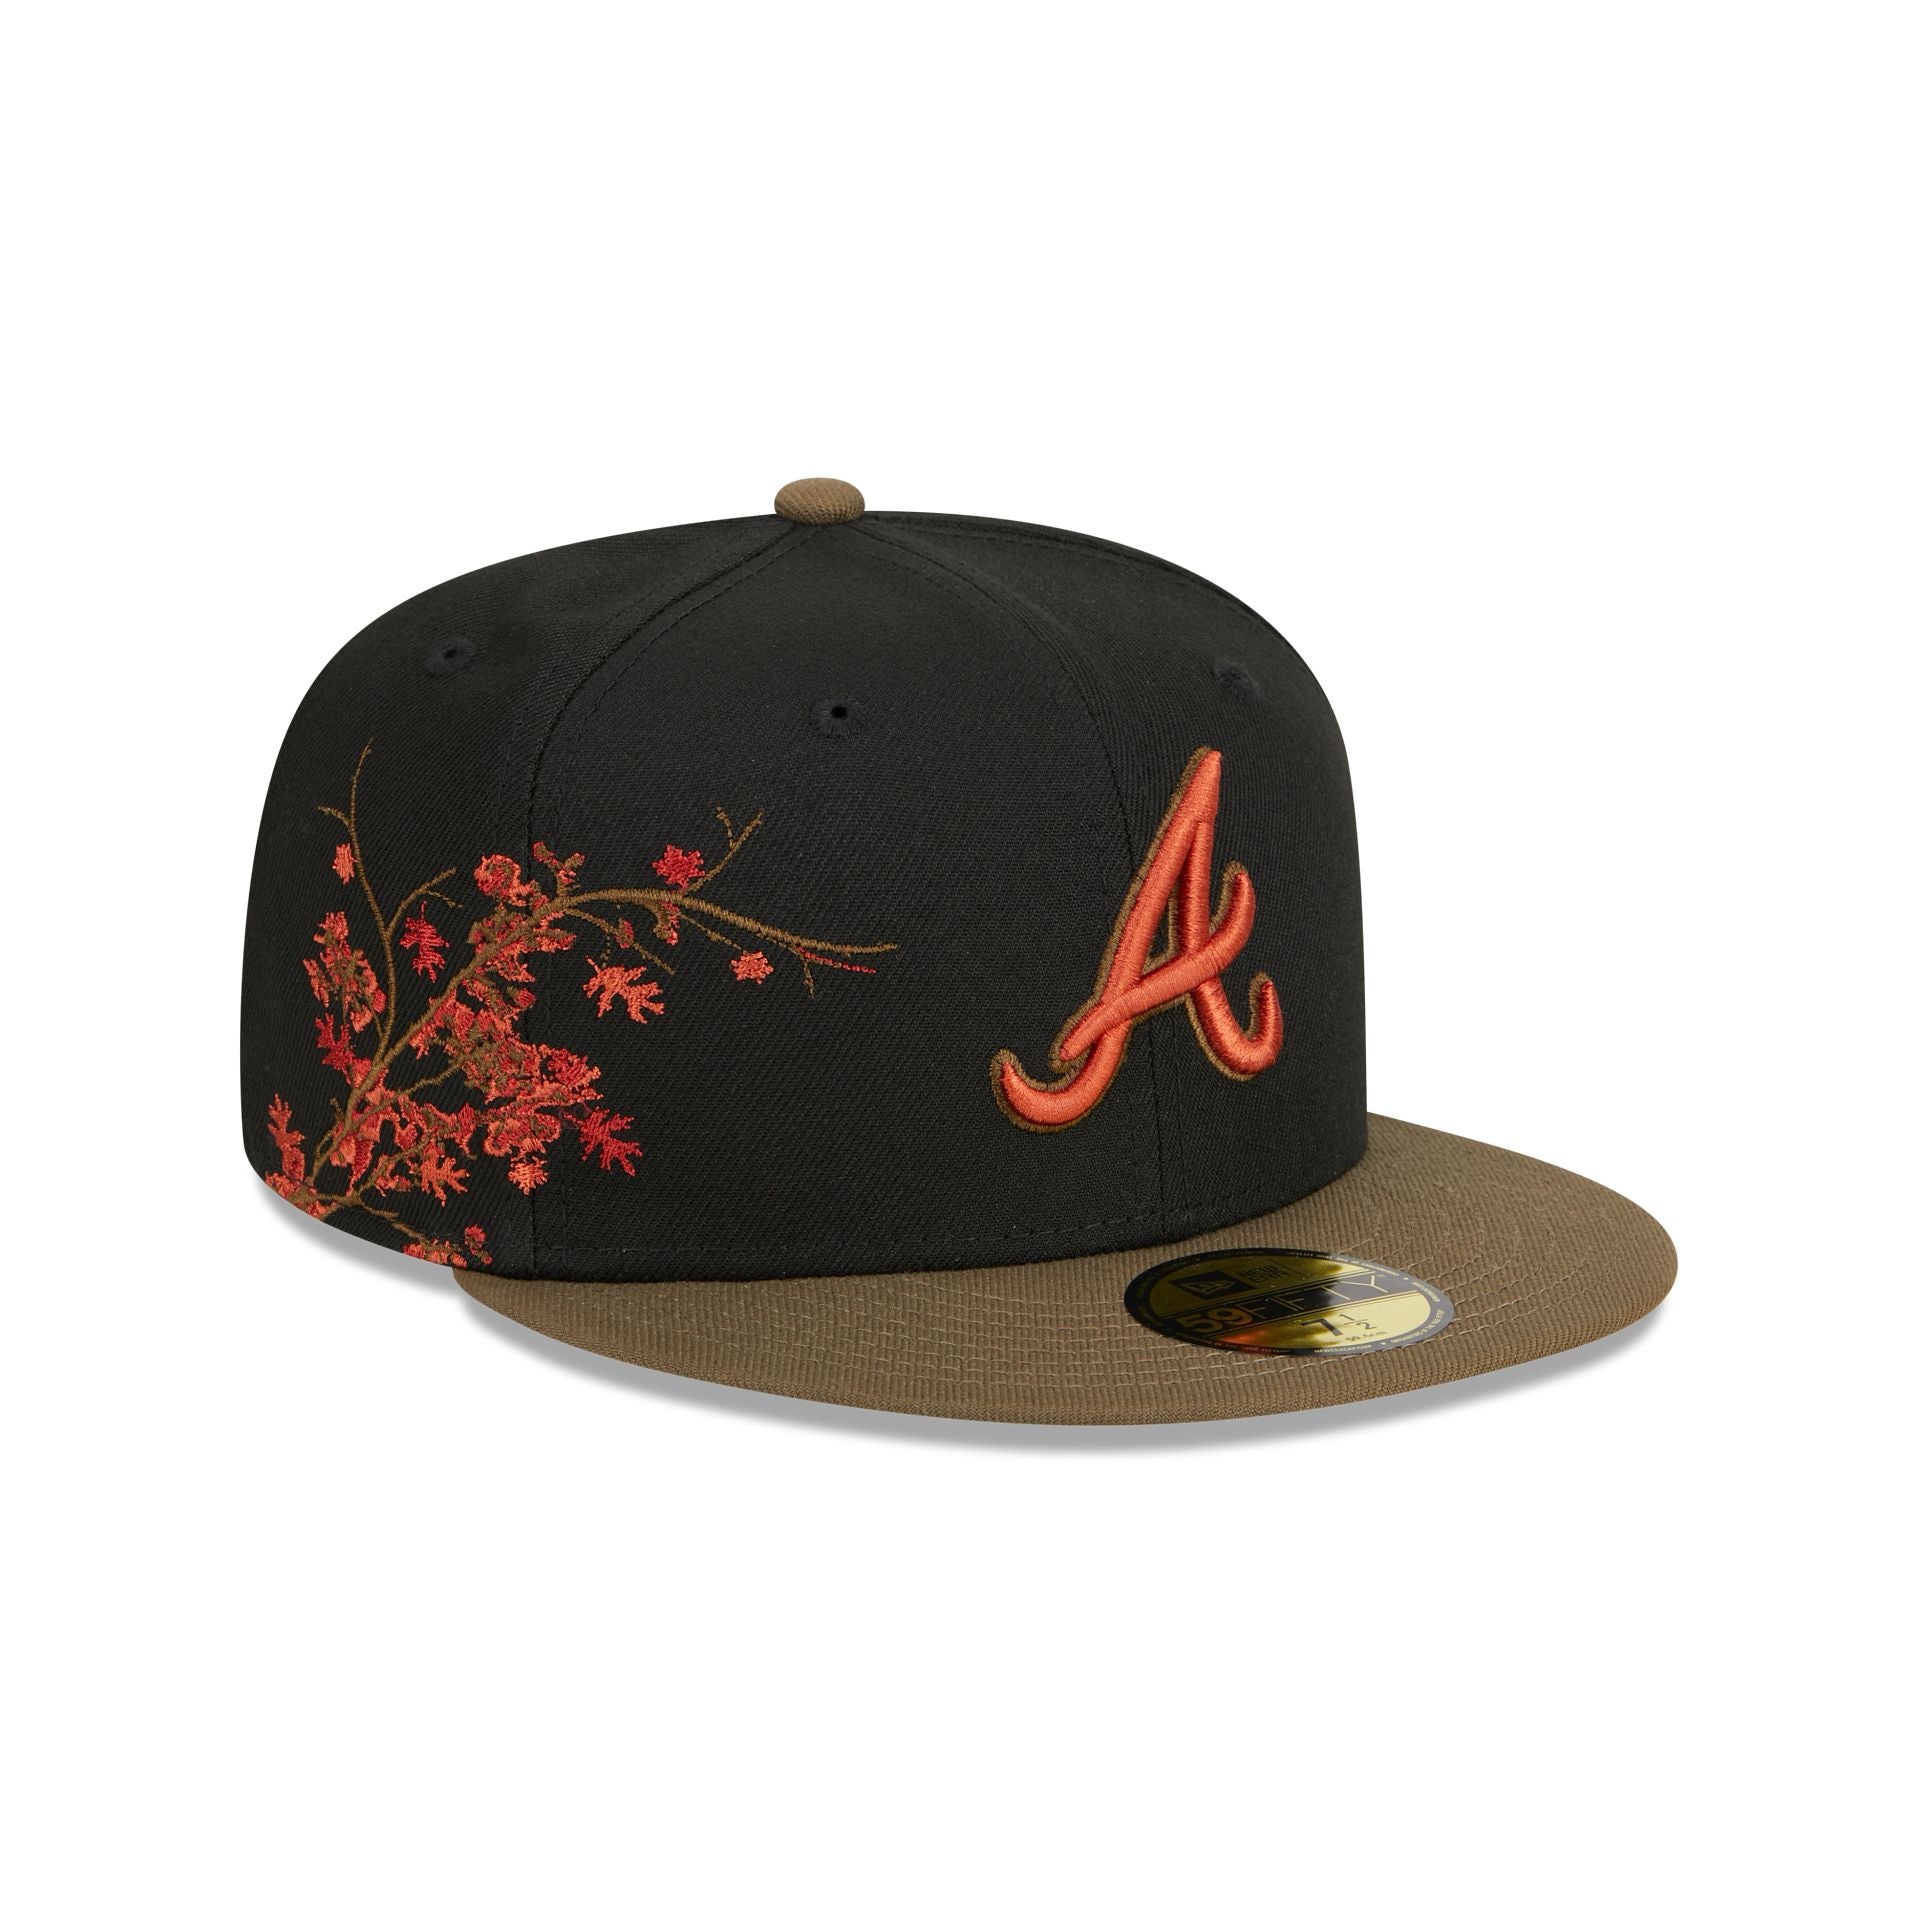 Atlanta Braves ATL MLB Game Authentic 59FIFTY Fitted Cap - 5950 A